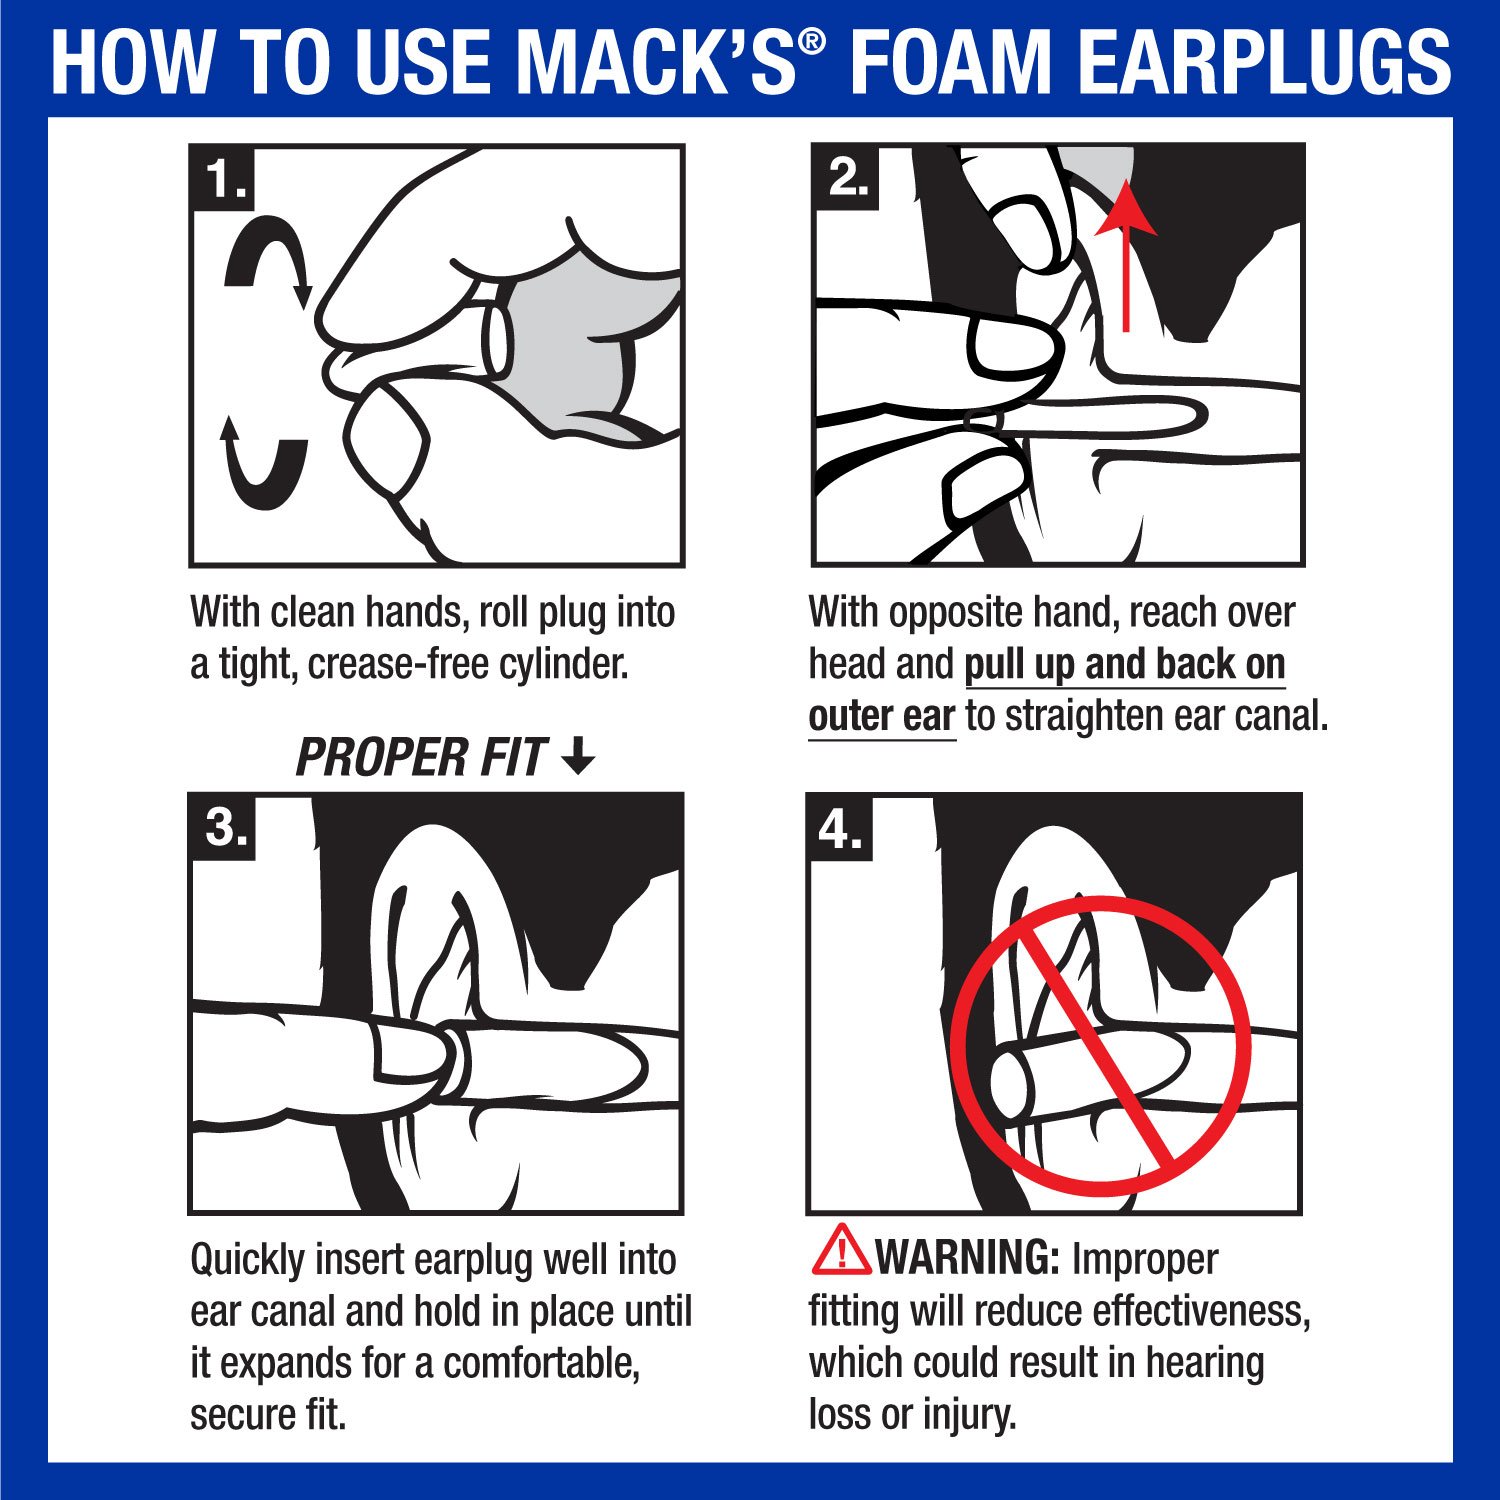 Mack’s Dreamgirl Soft Foam Earplugs, 7 Pair with Travel Case - Small Ear Plugs for Sleeping, Snoring, Studying, Loud Events, Traveling and Concerts